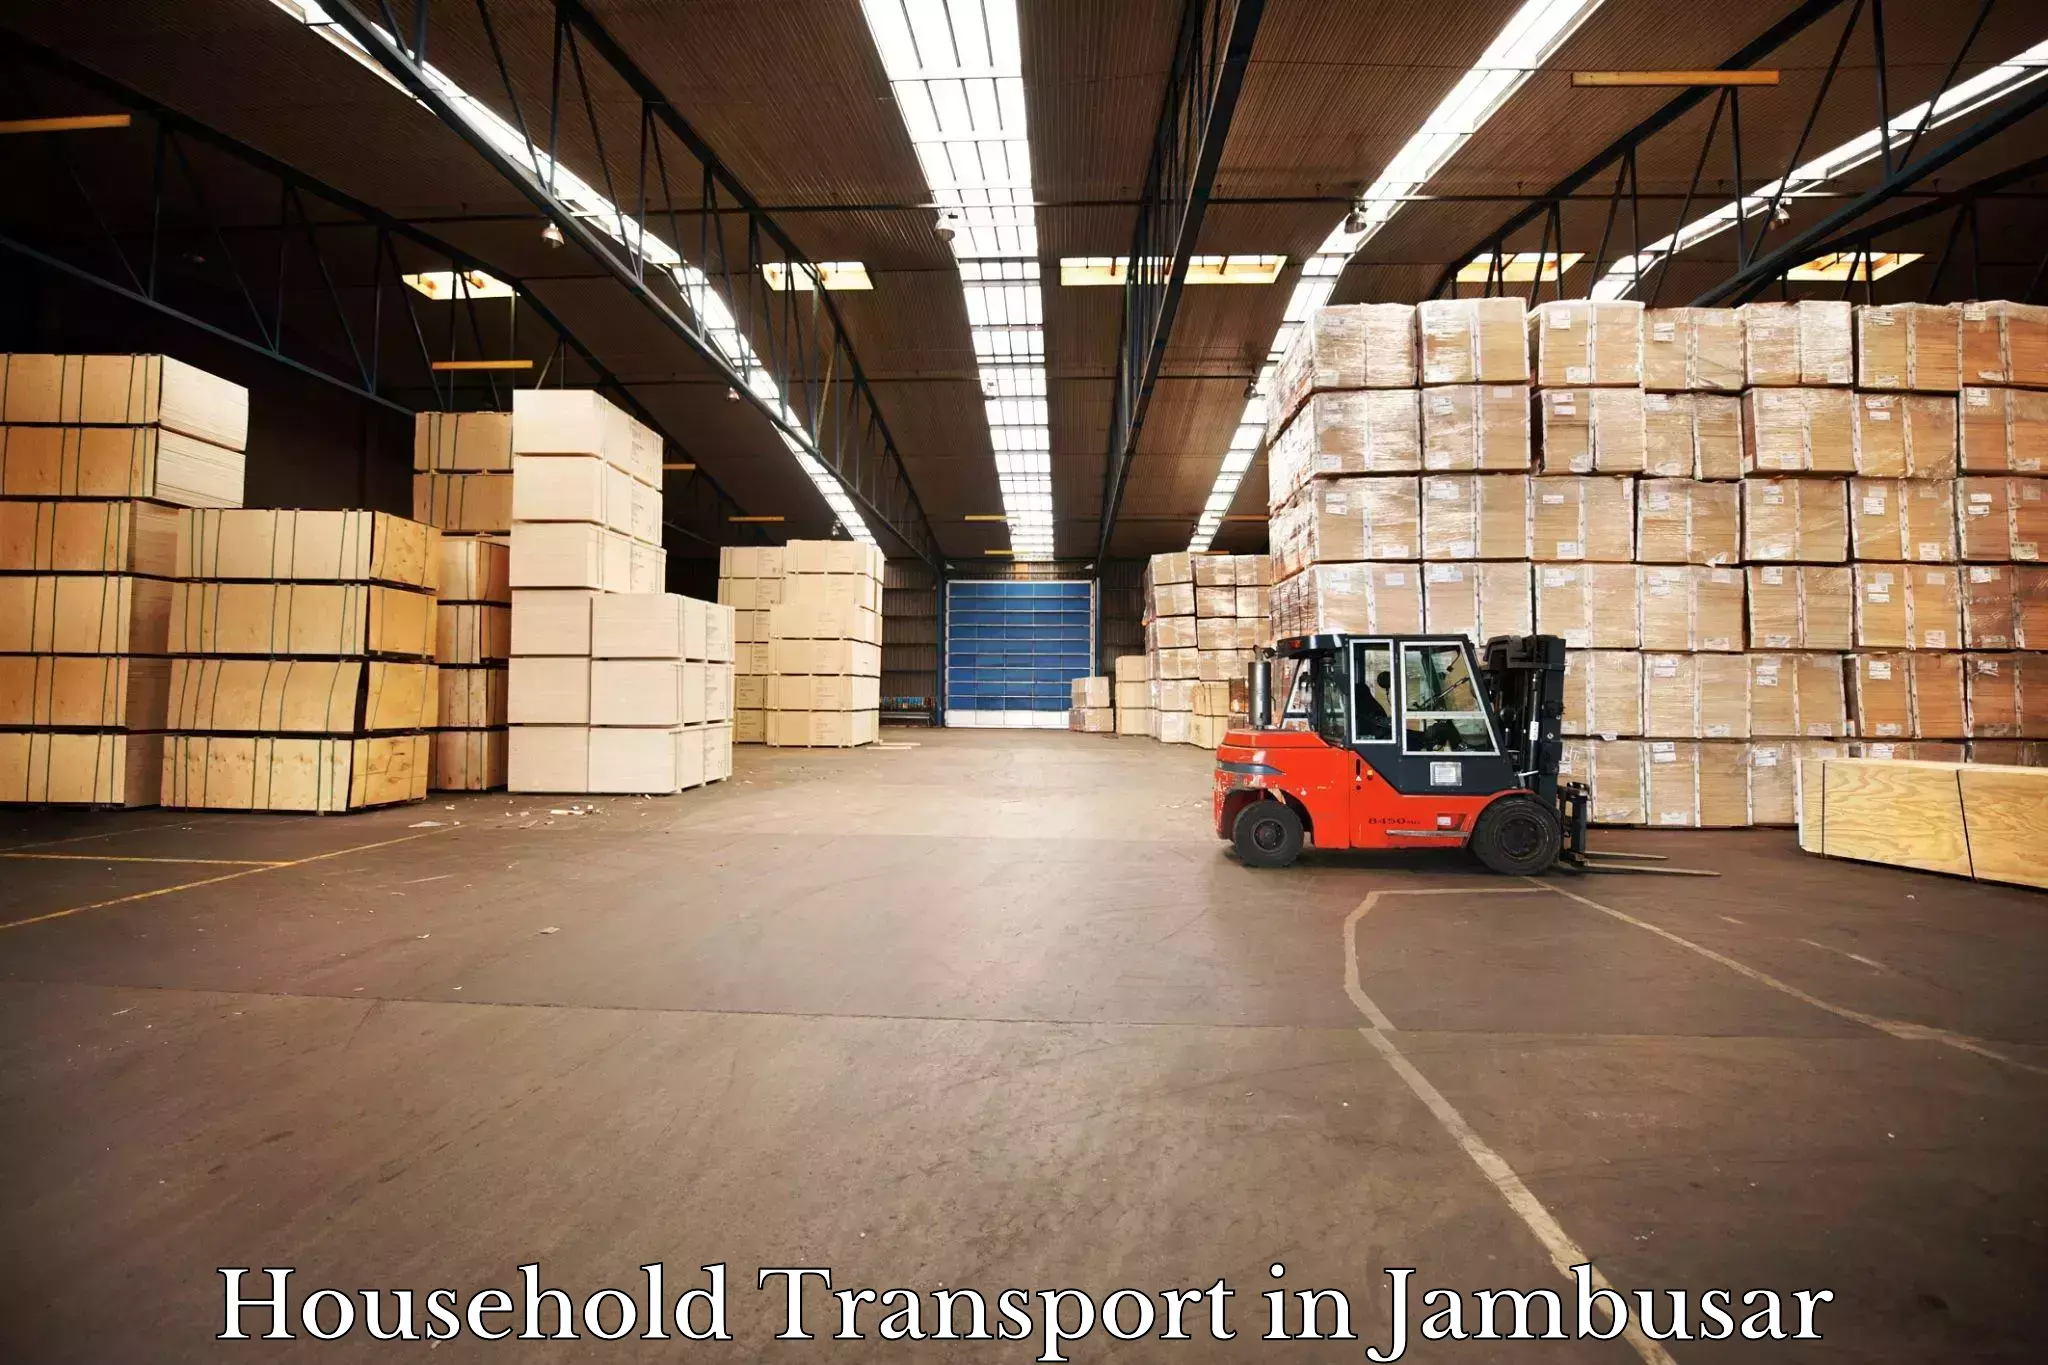 Household transport services in Jambusar